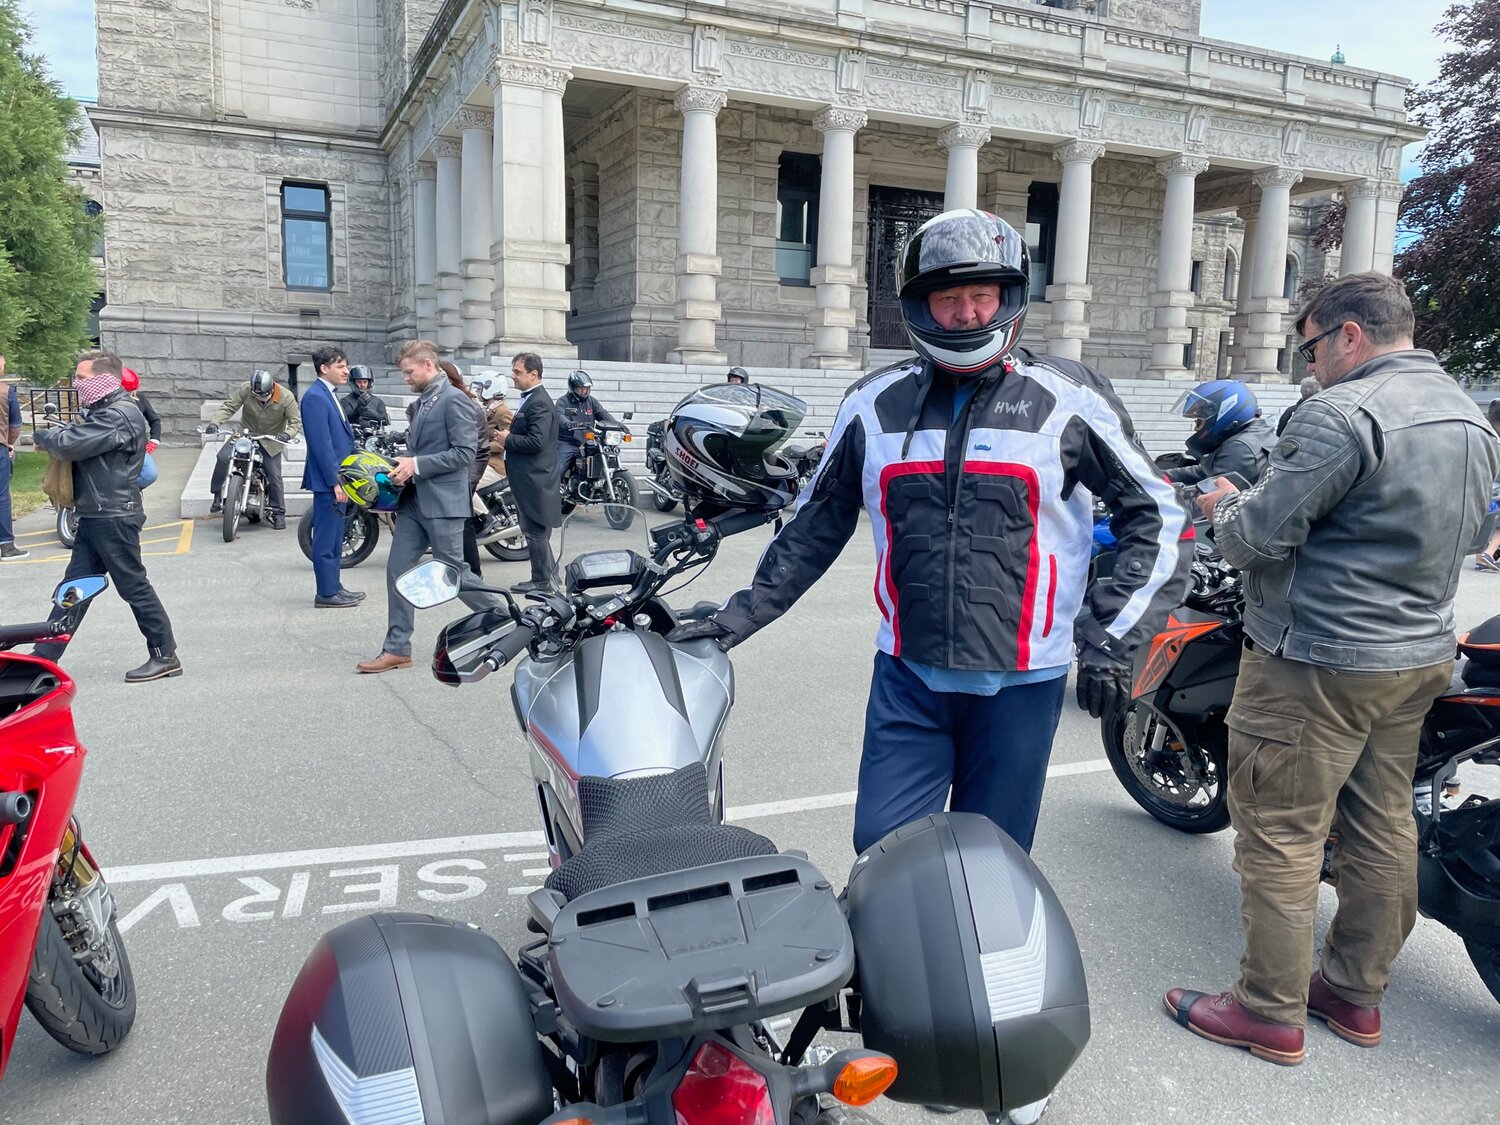 Darrell Cassidy rode for the third year in the Distinguished Gentleman’s Ride (a mens’ health fundraiser) over the May 20 weekend in Victoria. He raised $1,791 USD, the most out of 110 riders in Victoria (total raised $21,654 USD). For more information, visit gentlemansride.com.